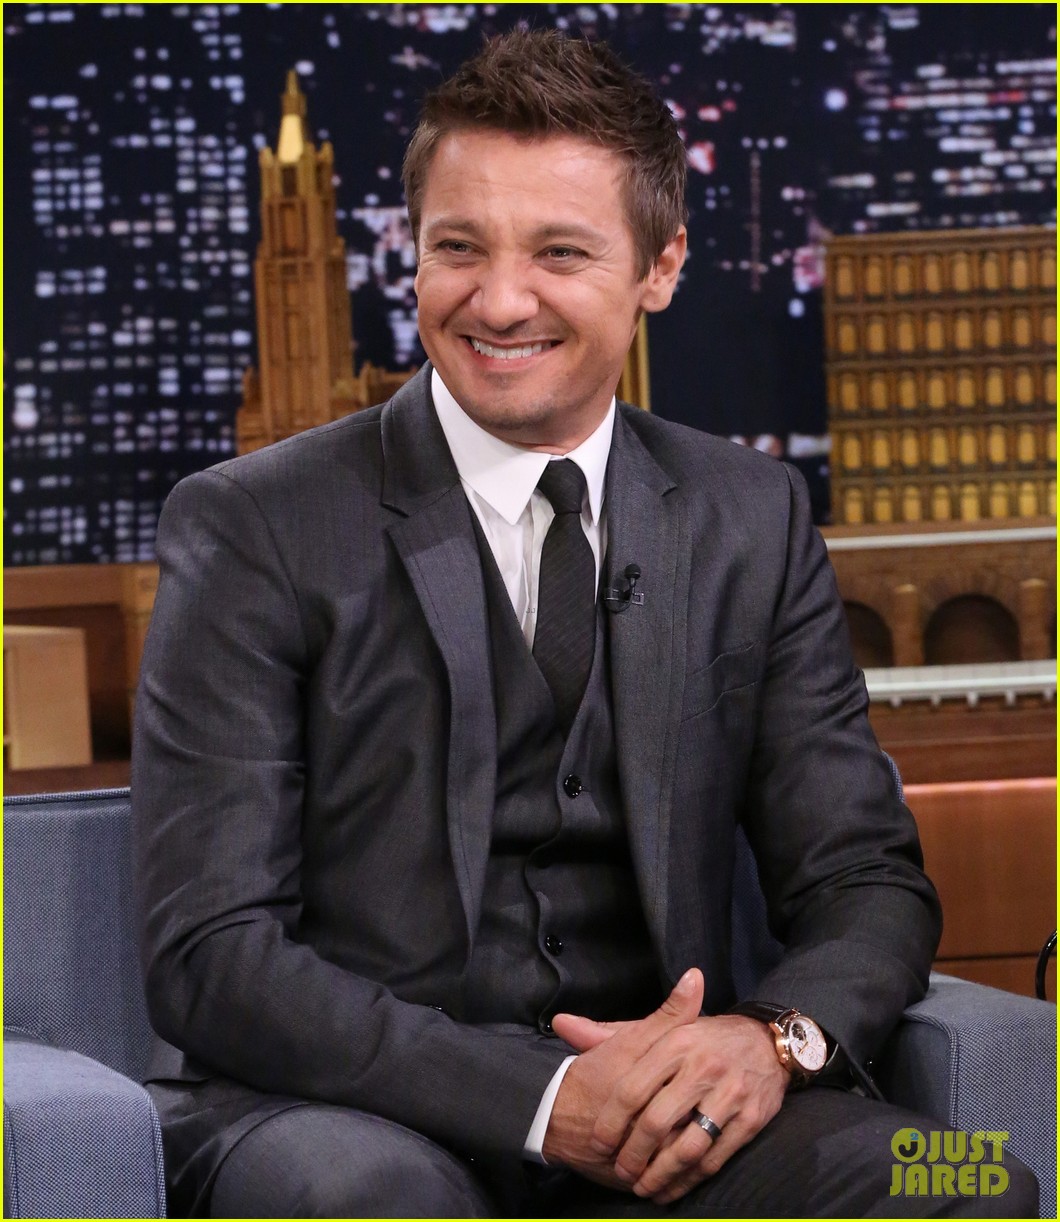 Jeremy Renner Shares His Funniest Photos on the 'Tonight Show' - Watch  Now!: Photo 3212891 | Jeremy Renner Pictures | Just Jared